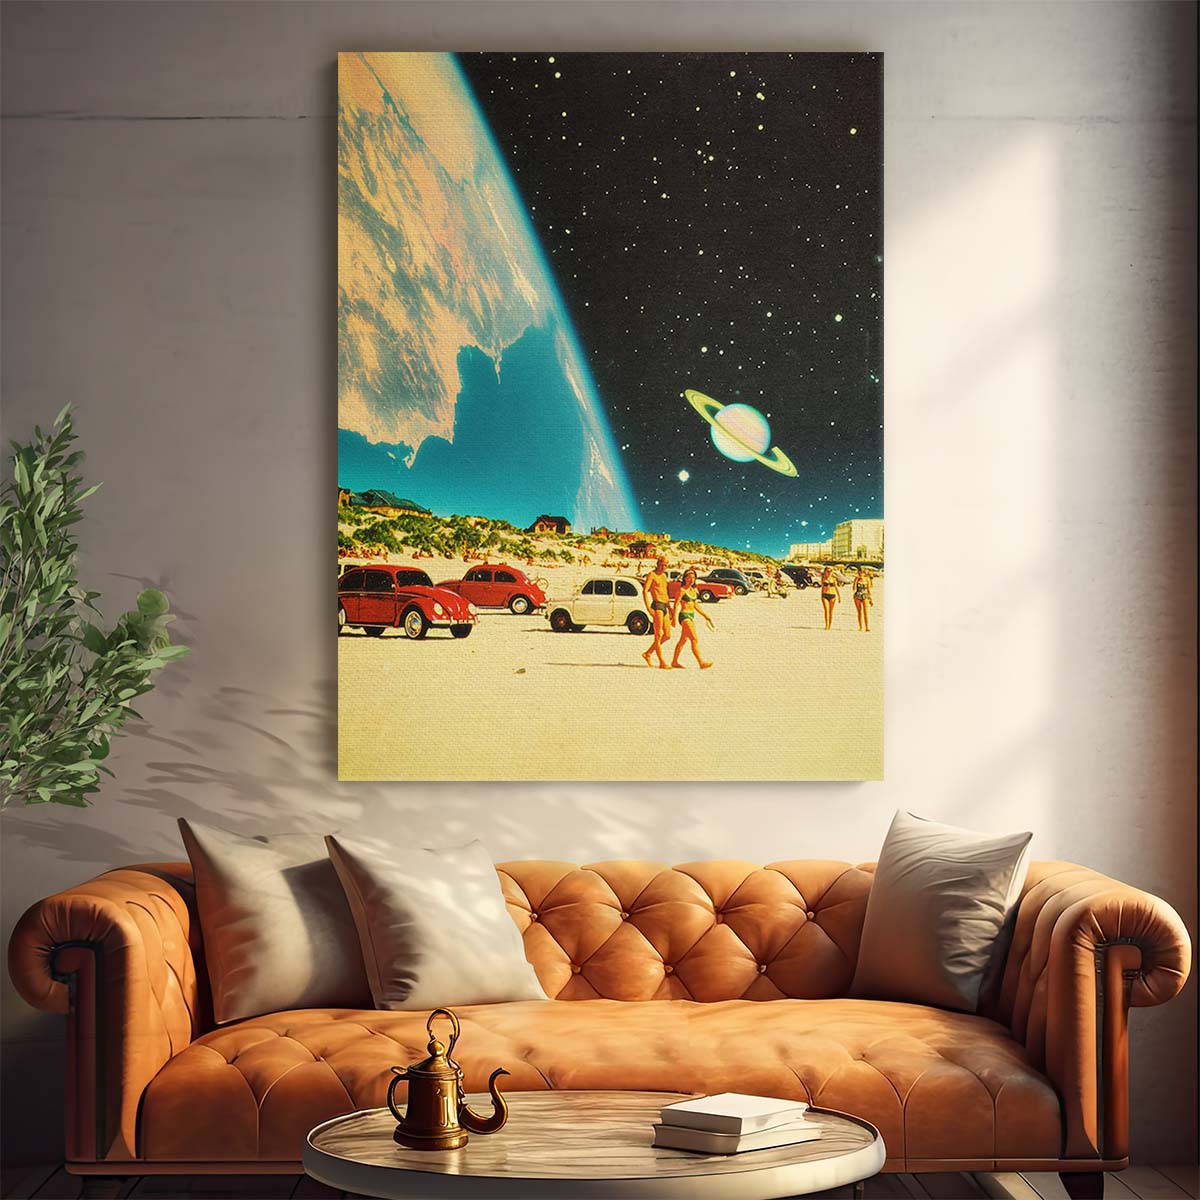 Contemporary Surreal Galaxy Beach Collage Art, Retro Futuristic Space Illustration by Luxuriance Designs, made in USA